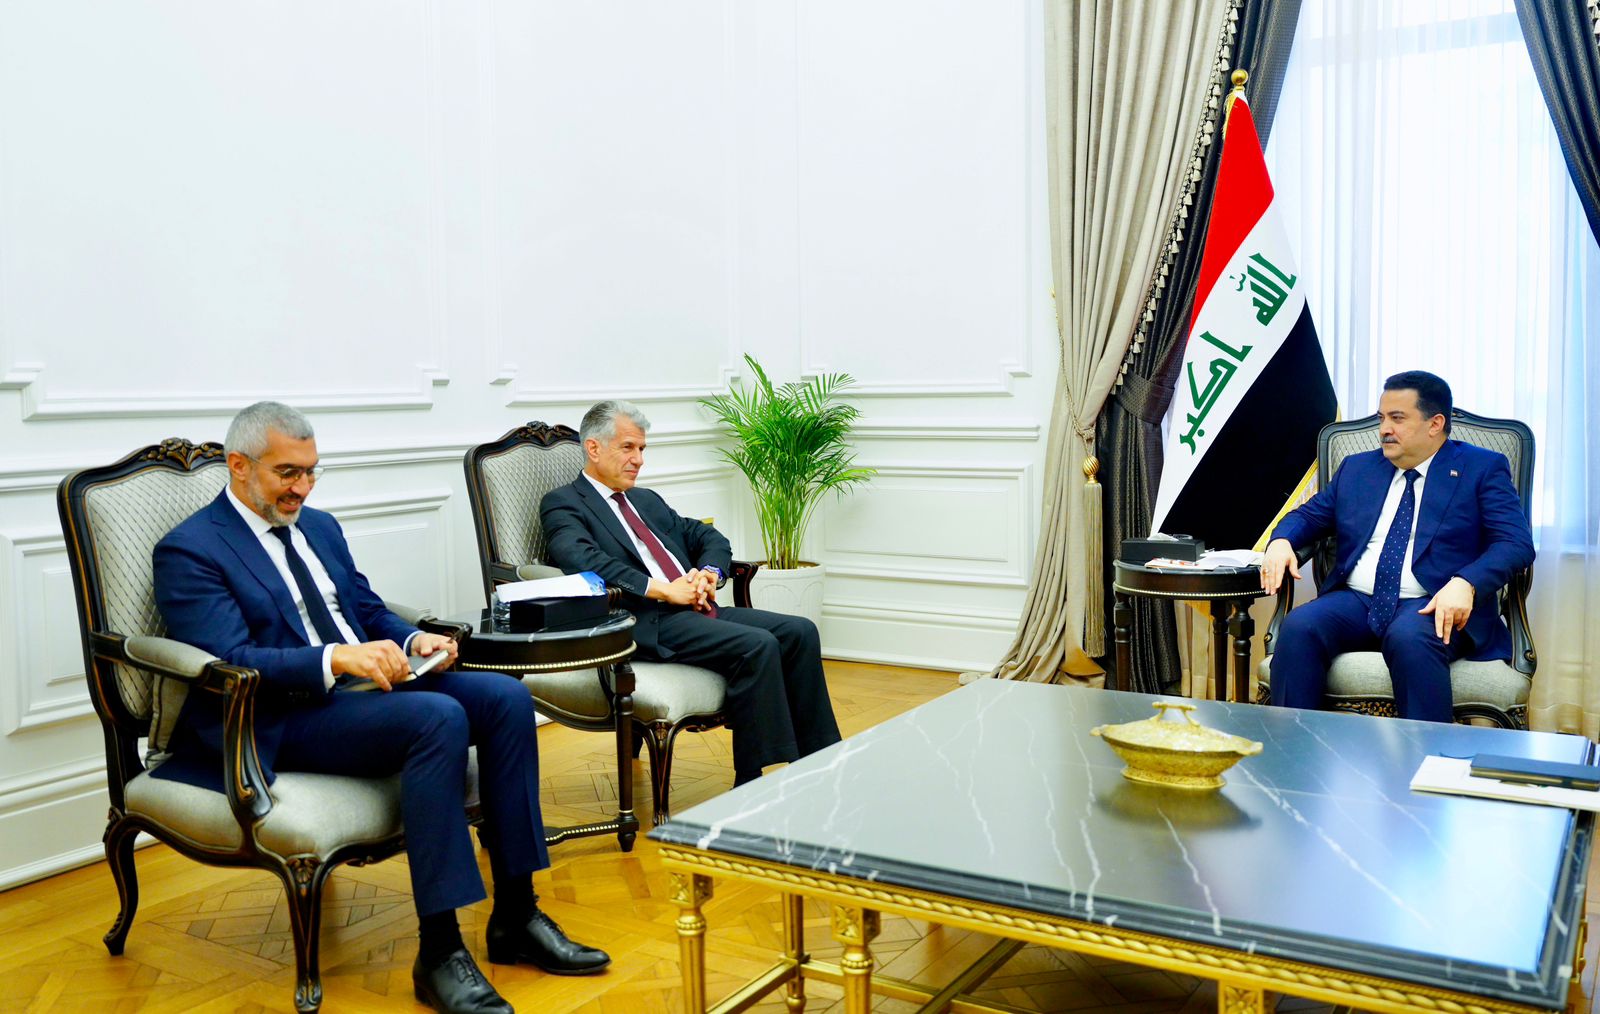 Iraq welcomes JP Morgan's expansion in the country